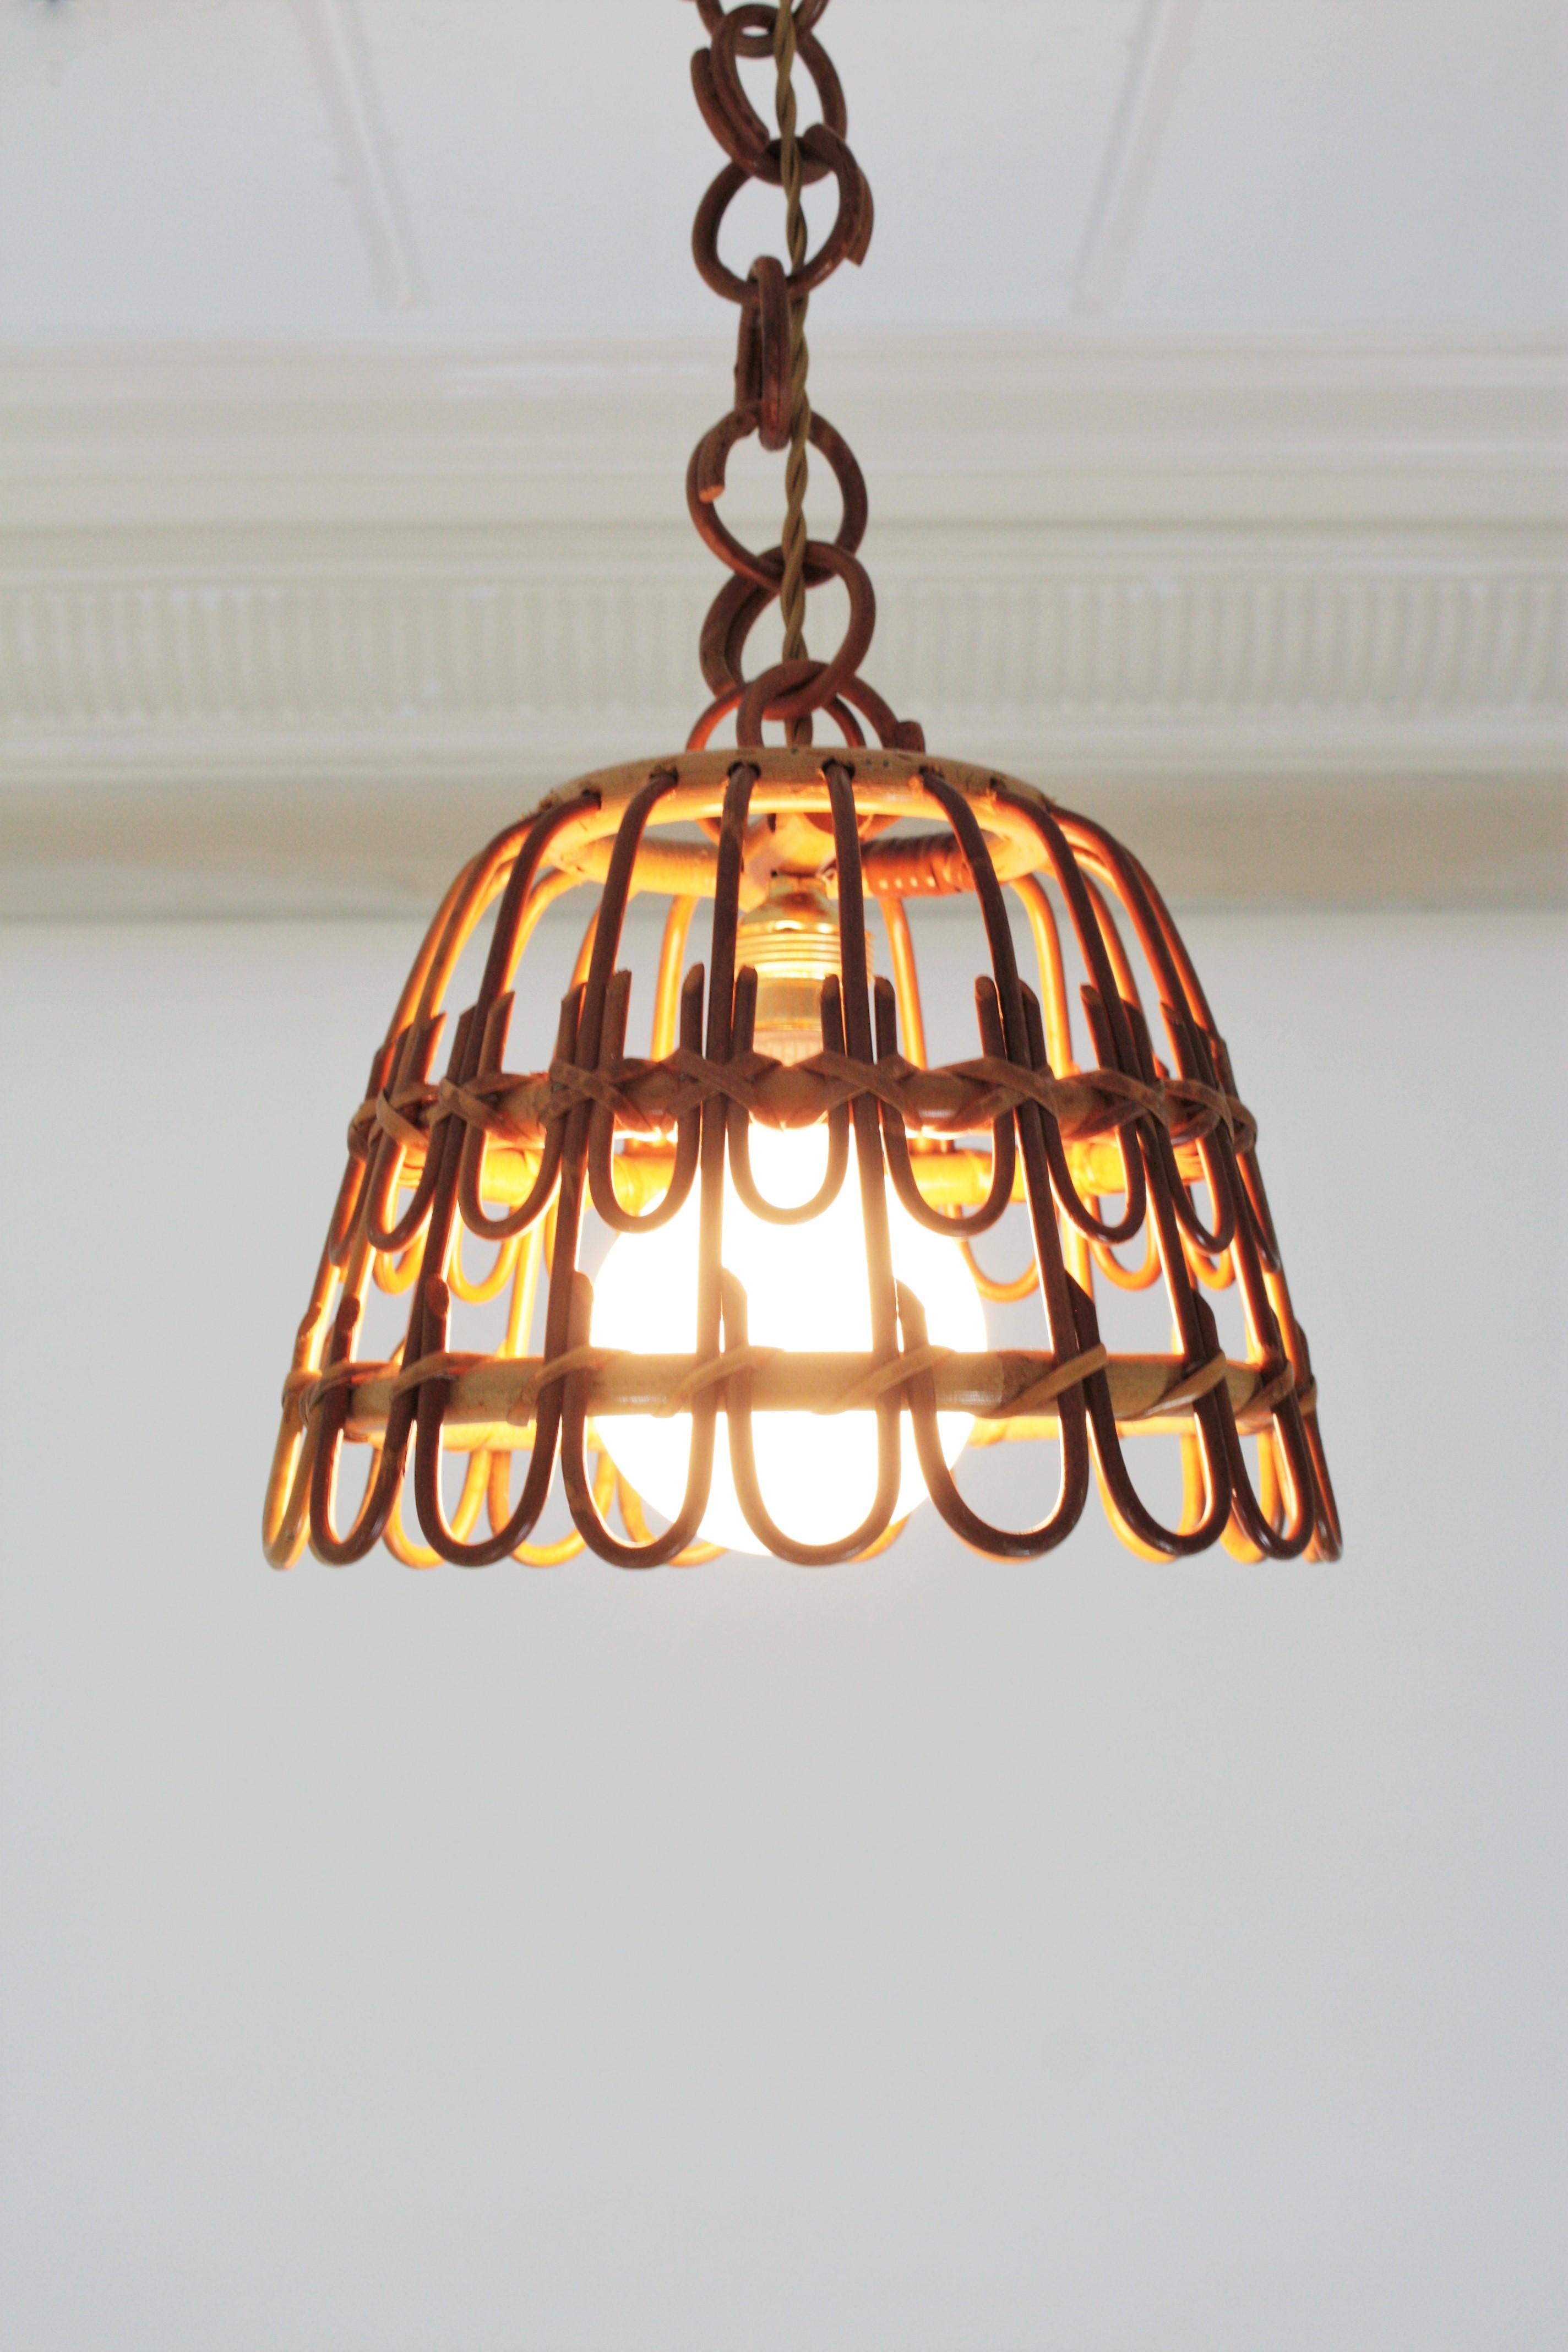 Bamboo 3 Spanish Rattan Bell Pendant Lights Ceiling Hanging Lamps For Sale